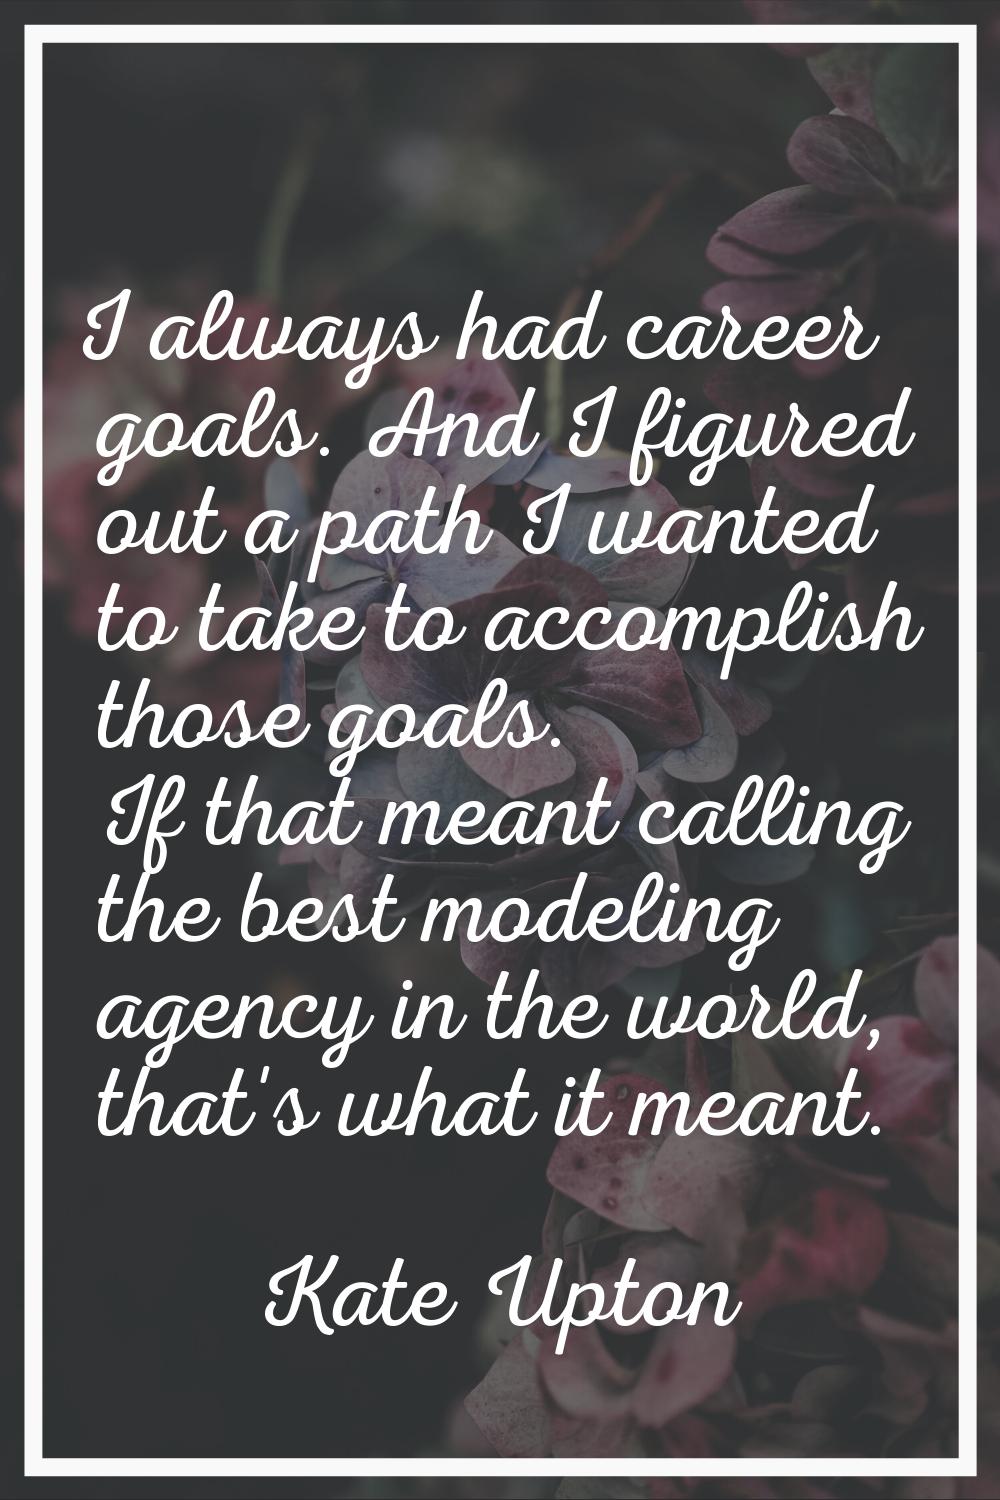 I always had career goals. And I figured out a path I wanted to take to accomplish those goals. If 